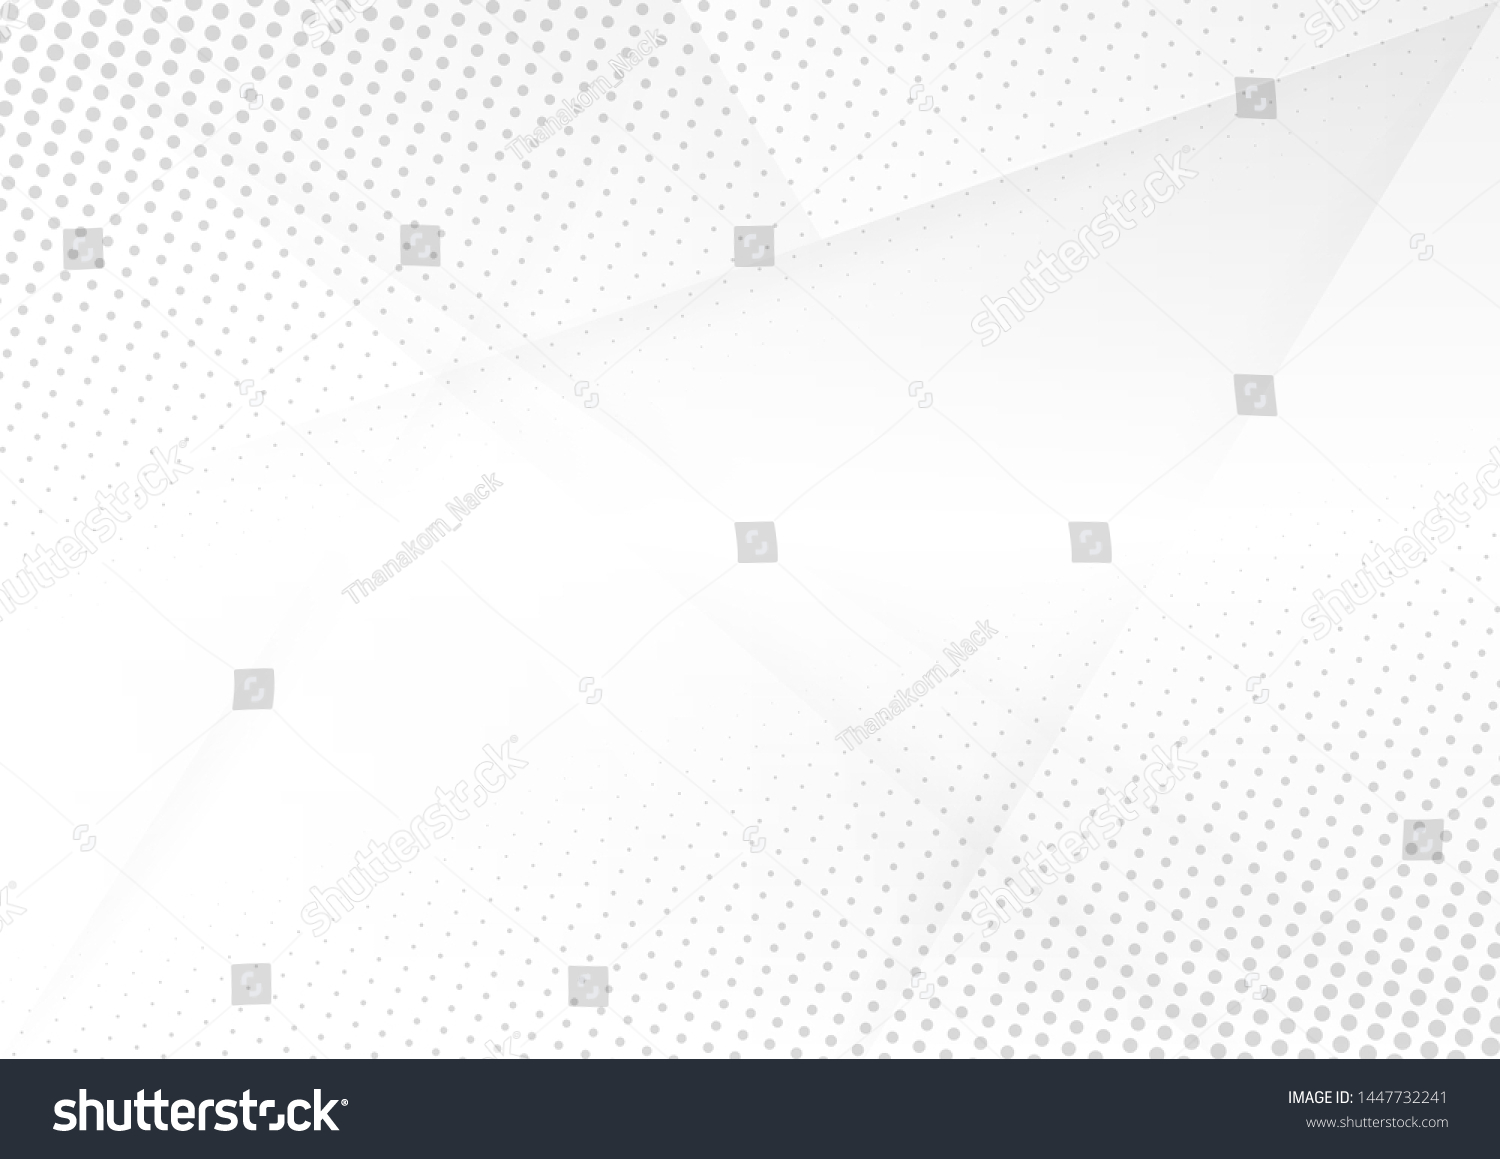 Abstract white and gray gradient background.Halftone dots design background.vector Illustration. #1447732241